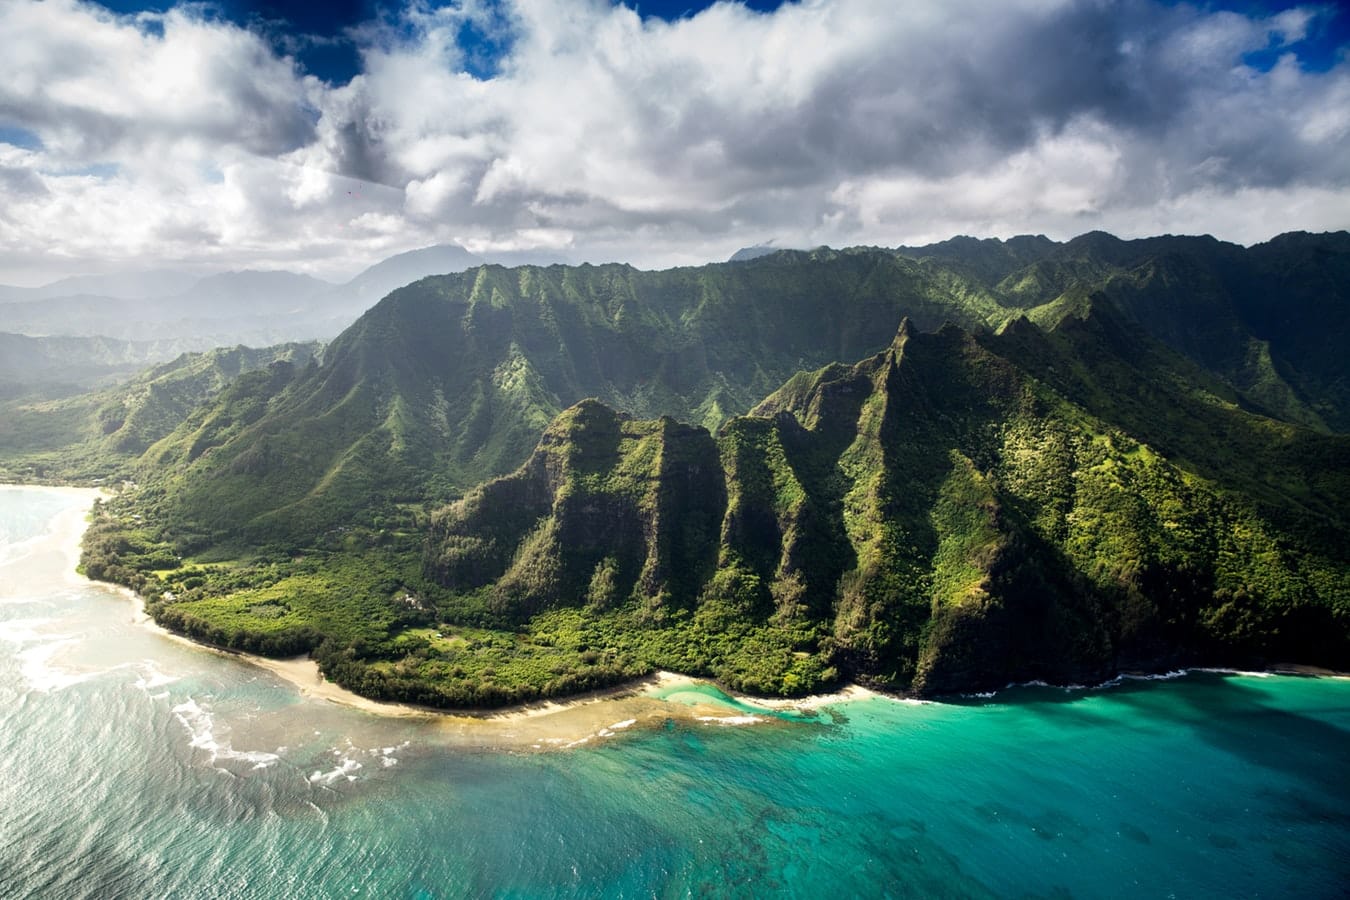 Hawaii Island Guide: What Exactly Is The Best Hawaiian Island To Visit?